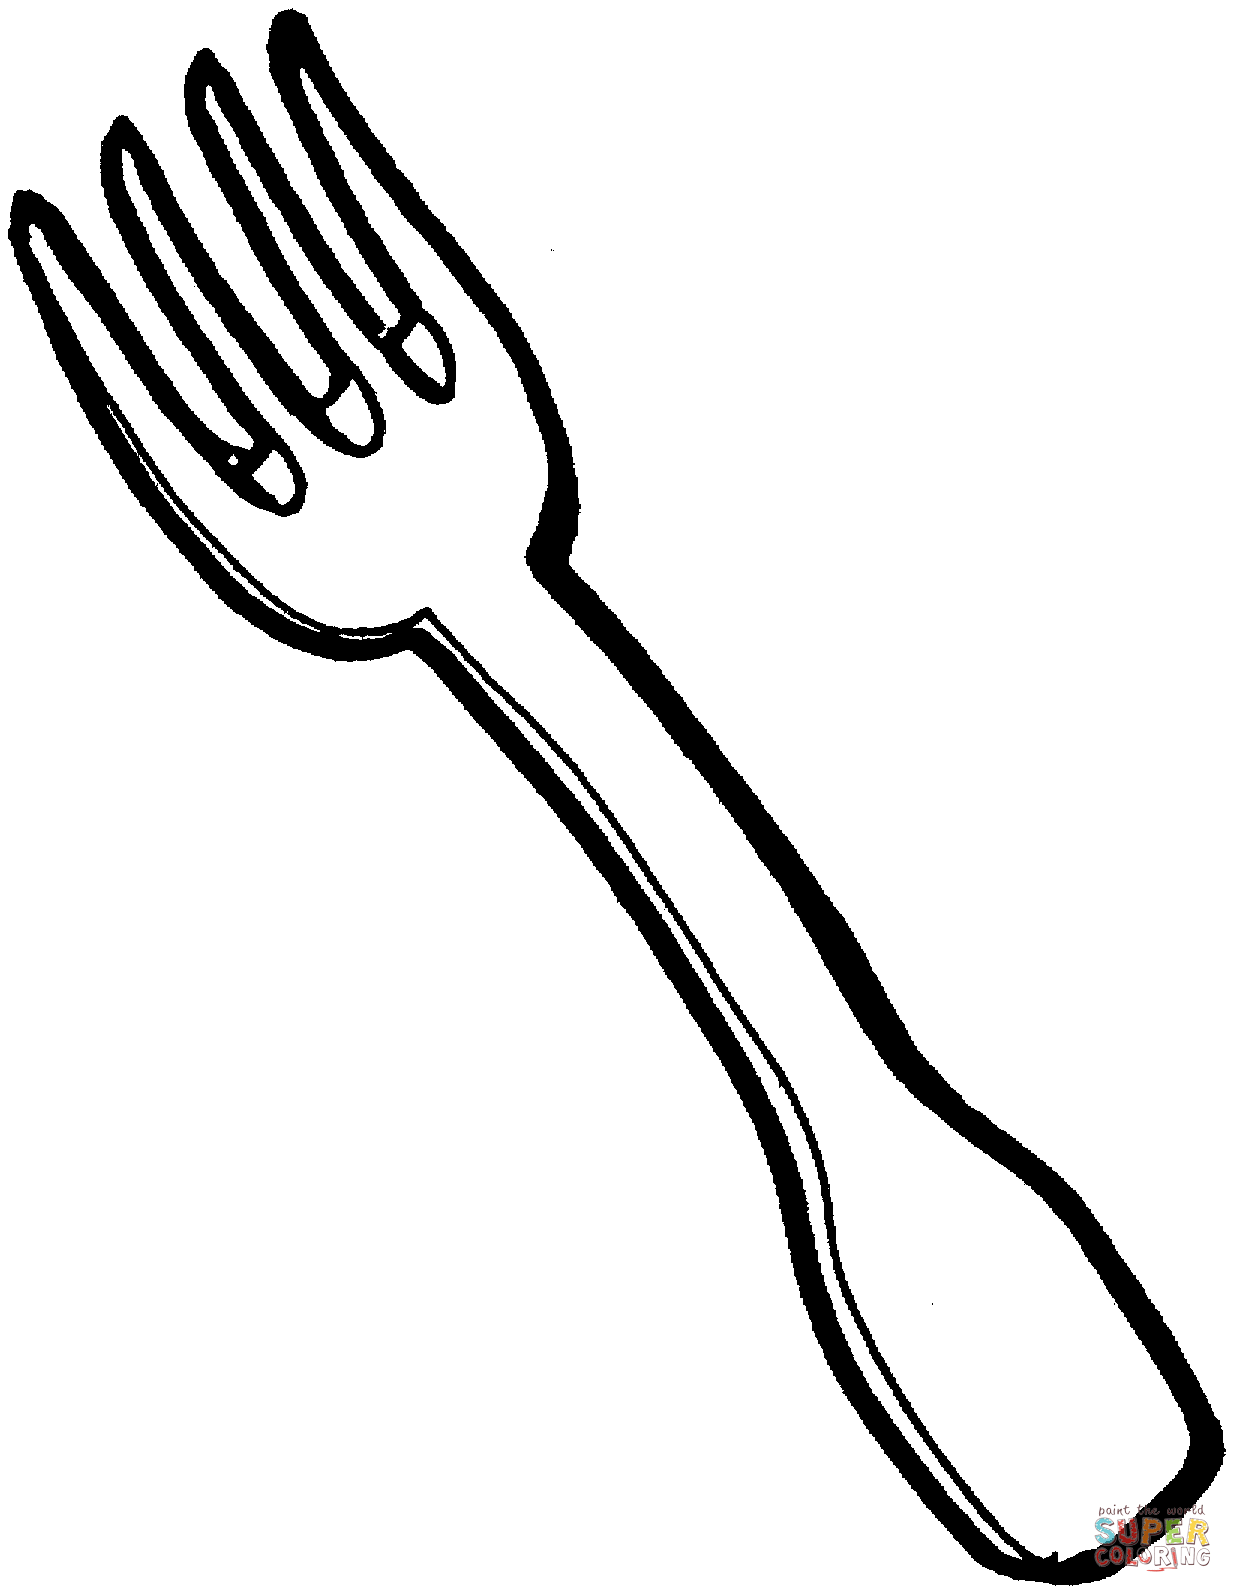 Free Fork Clipart drawn, Download Free Clip Art on Owips